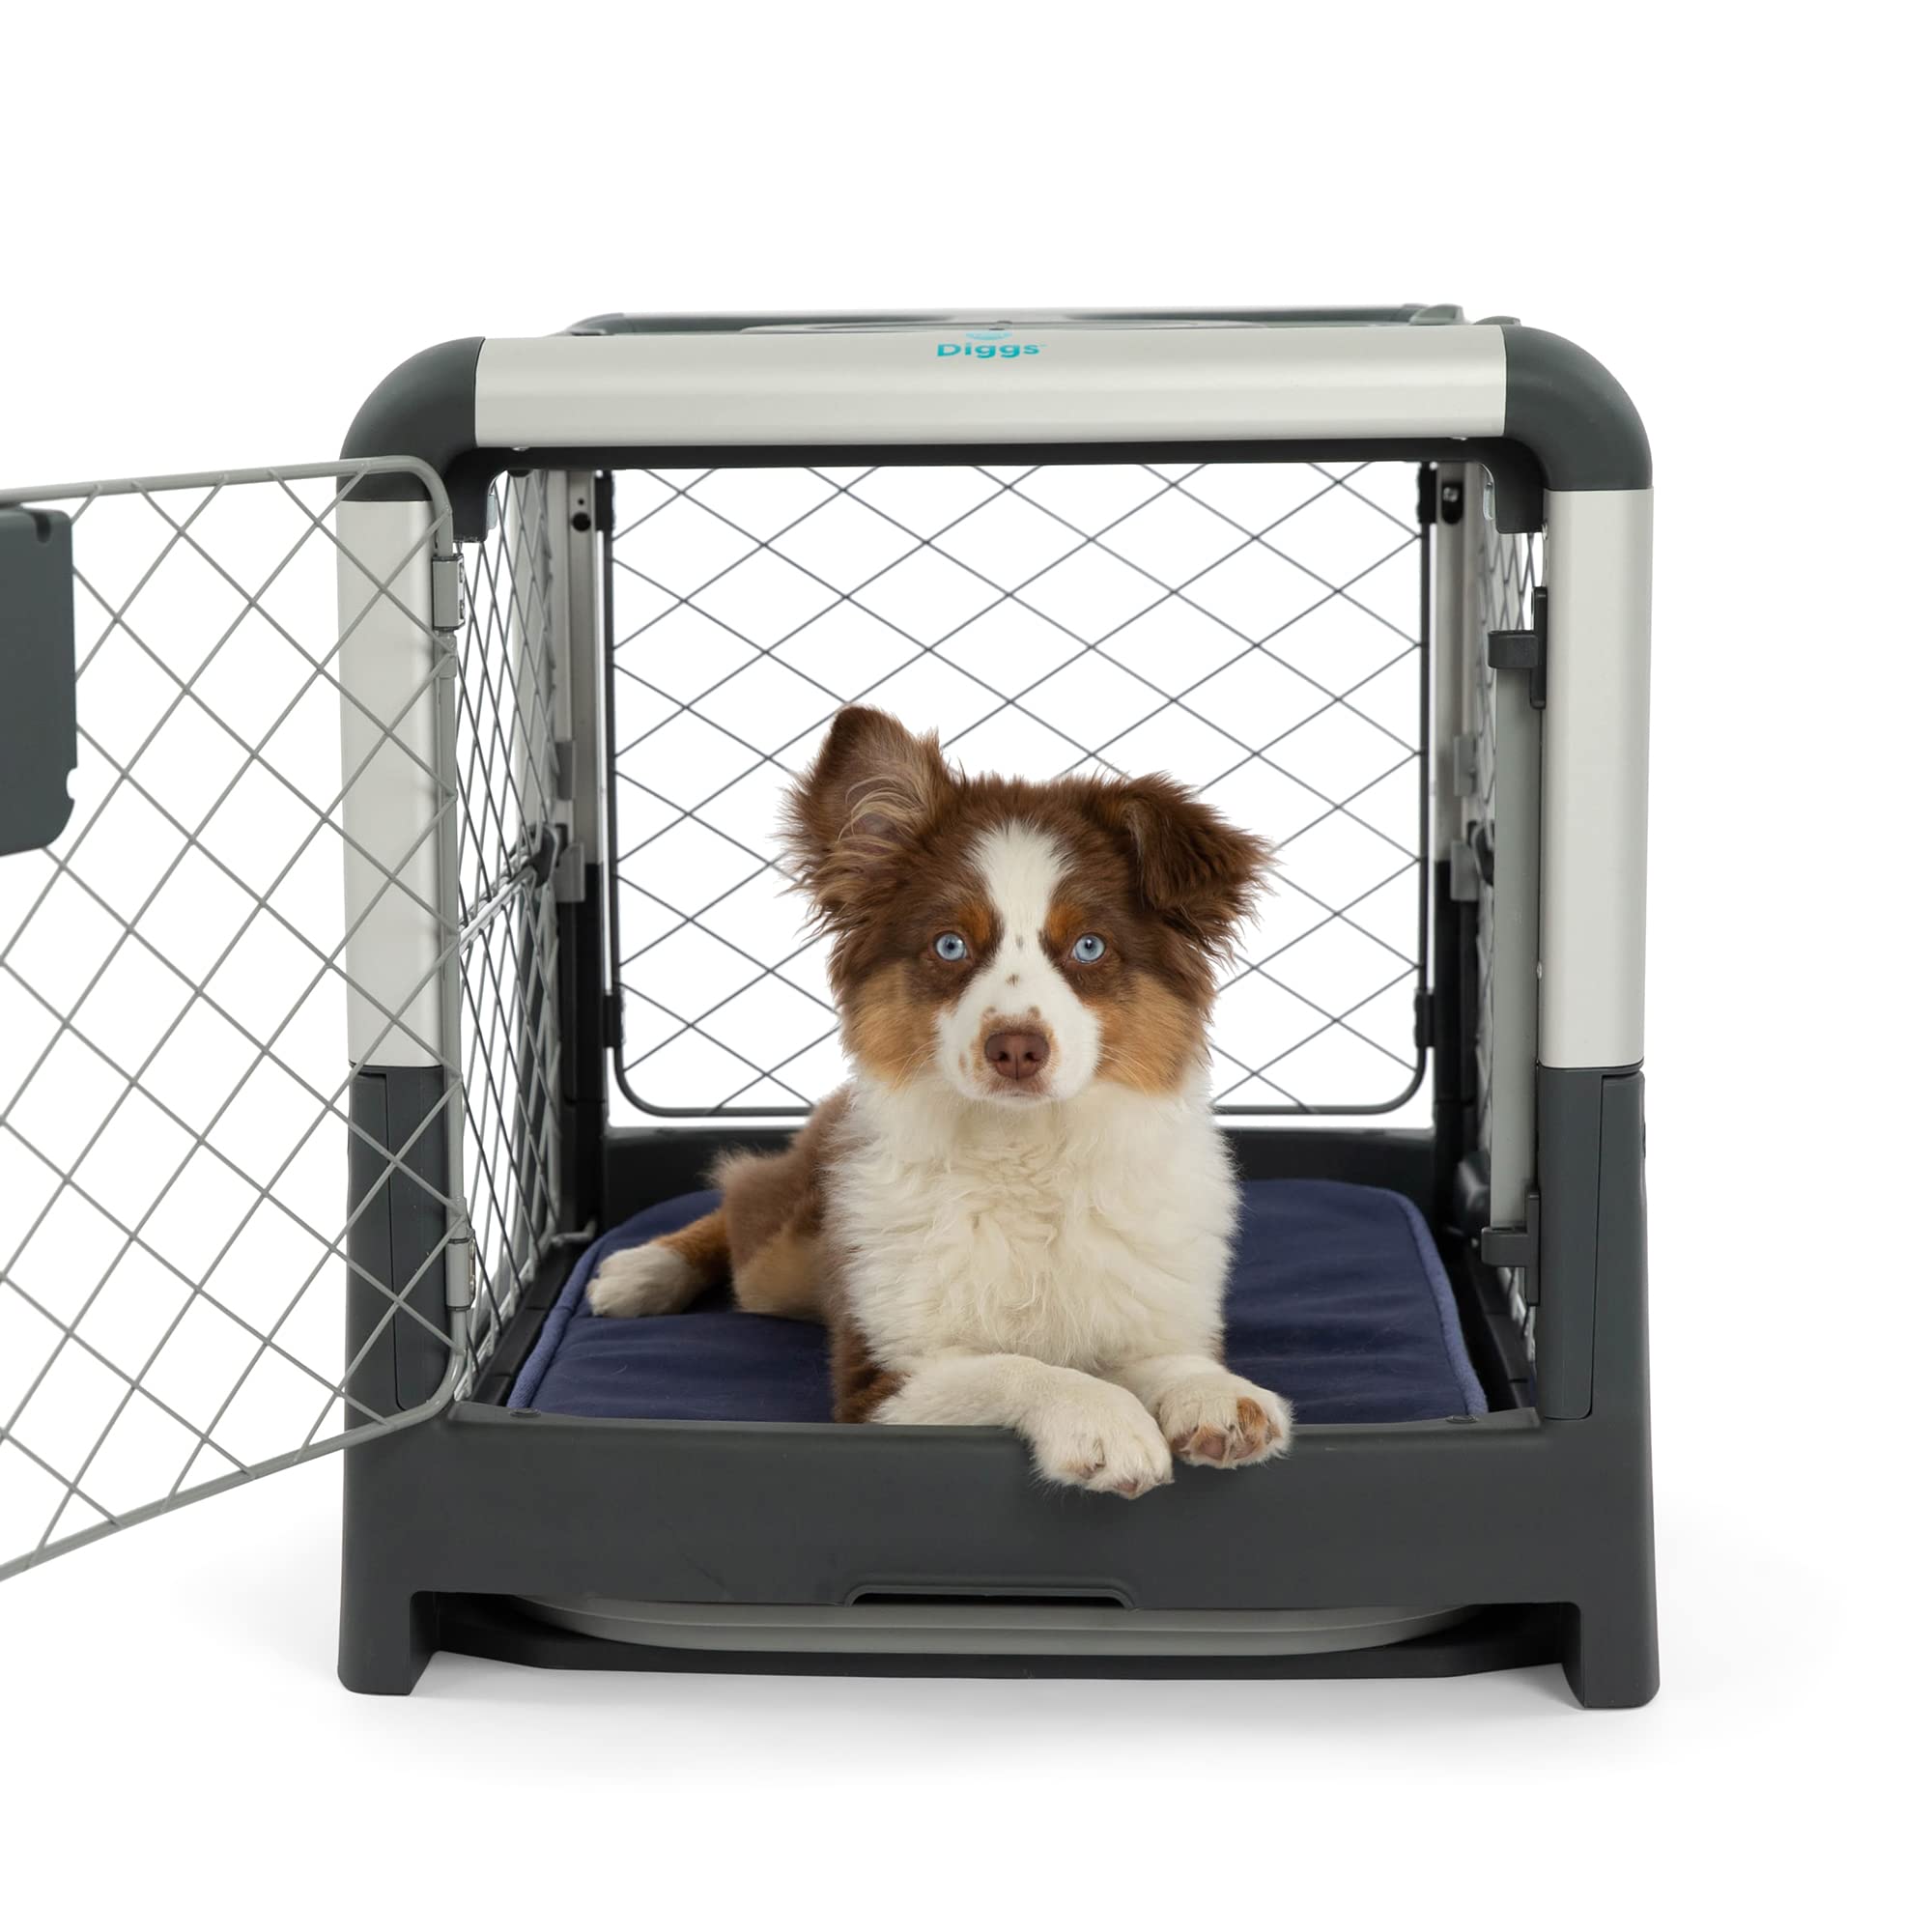 Diggs Revol Dog Crate (Collapsible Dog Crate, Portable Dog Crate, Travel Dog Crate, Dog Kennel) For Small Dogs And Puppies (Grey